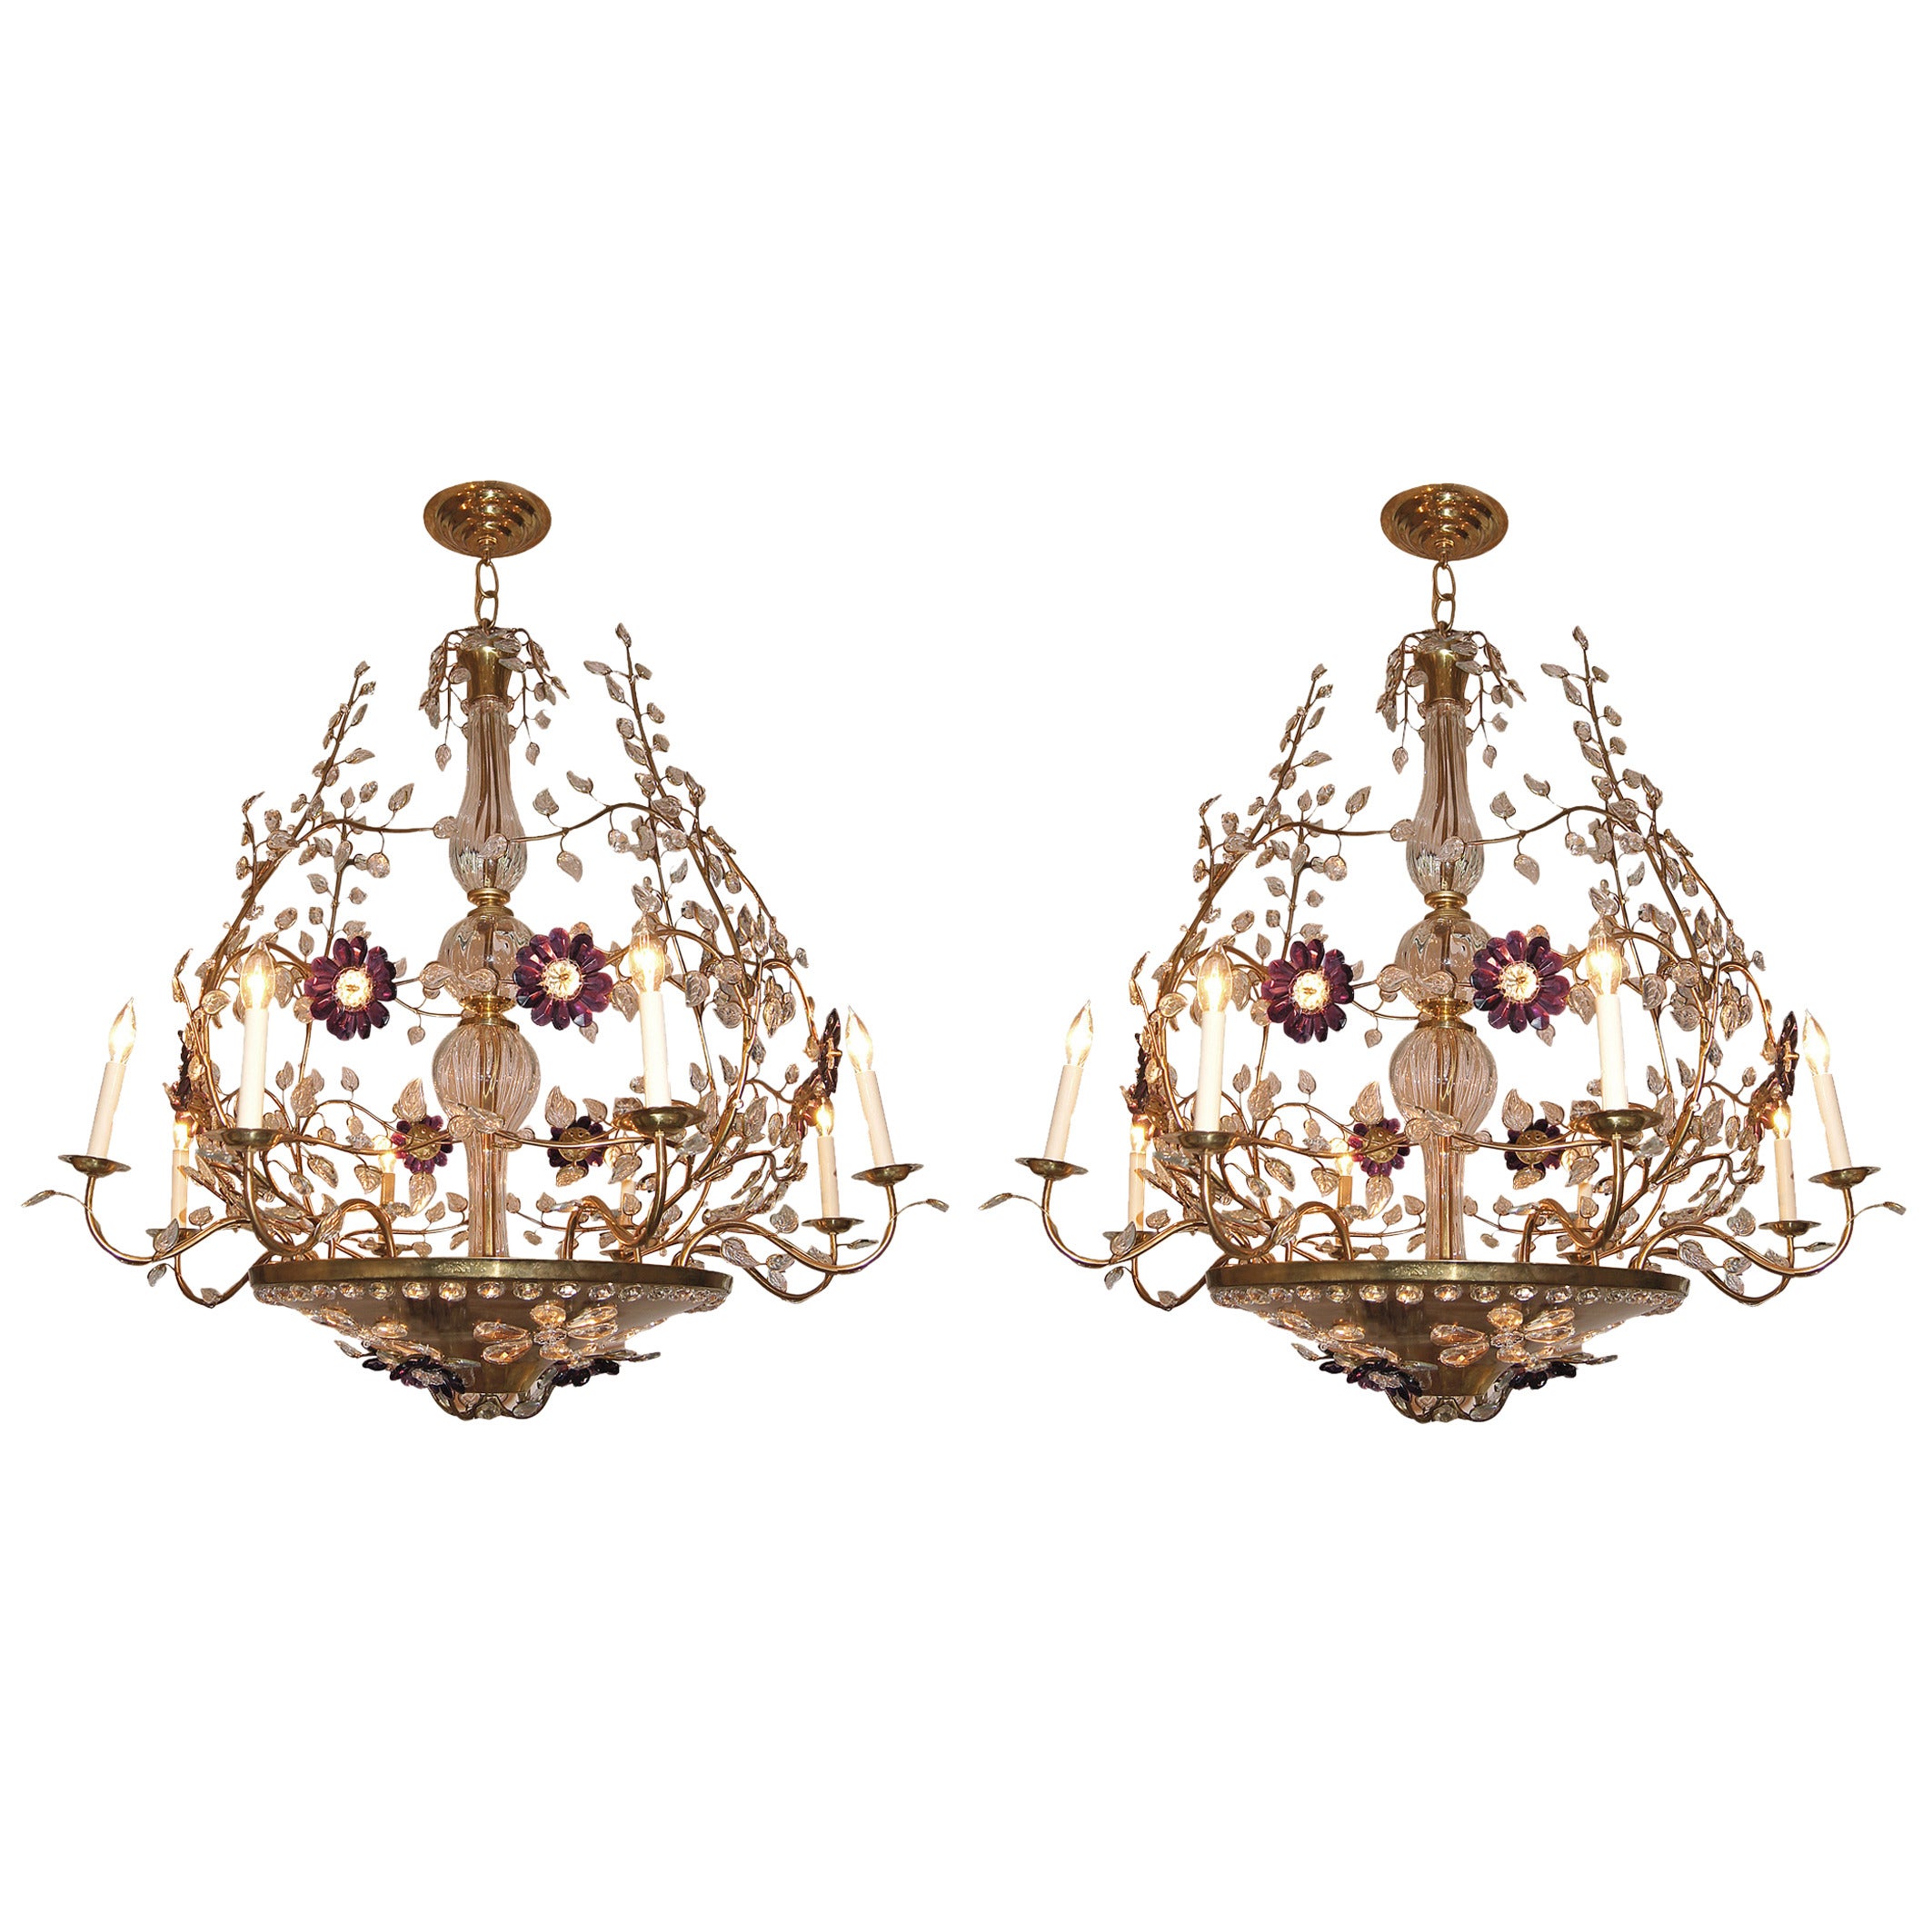 Pair of Large Gilt Chandeliers with Amethyst Flowers For Sale